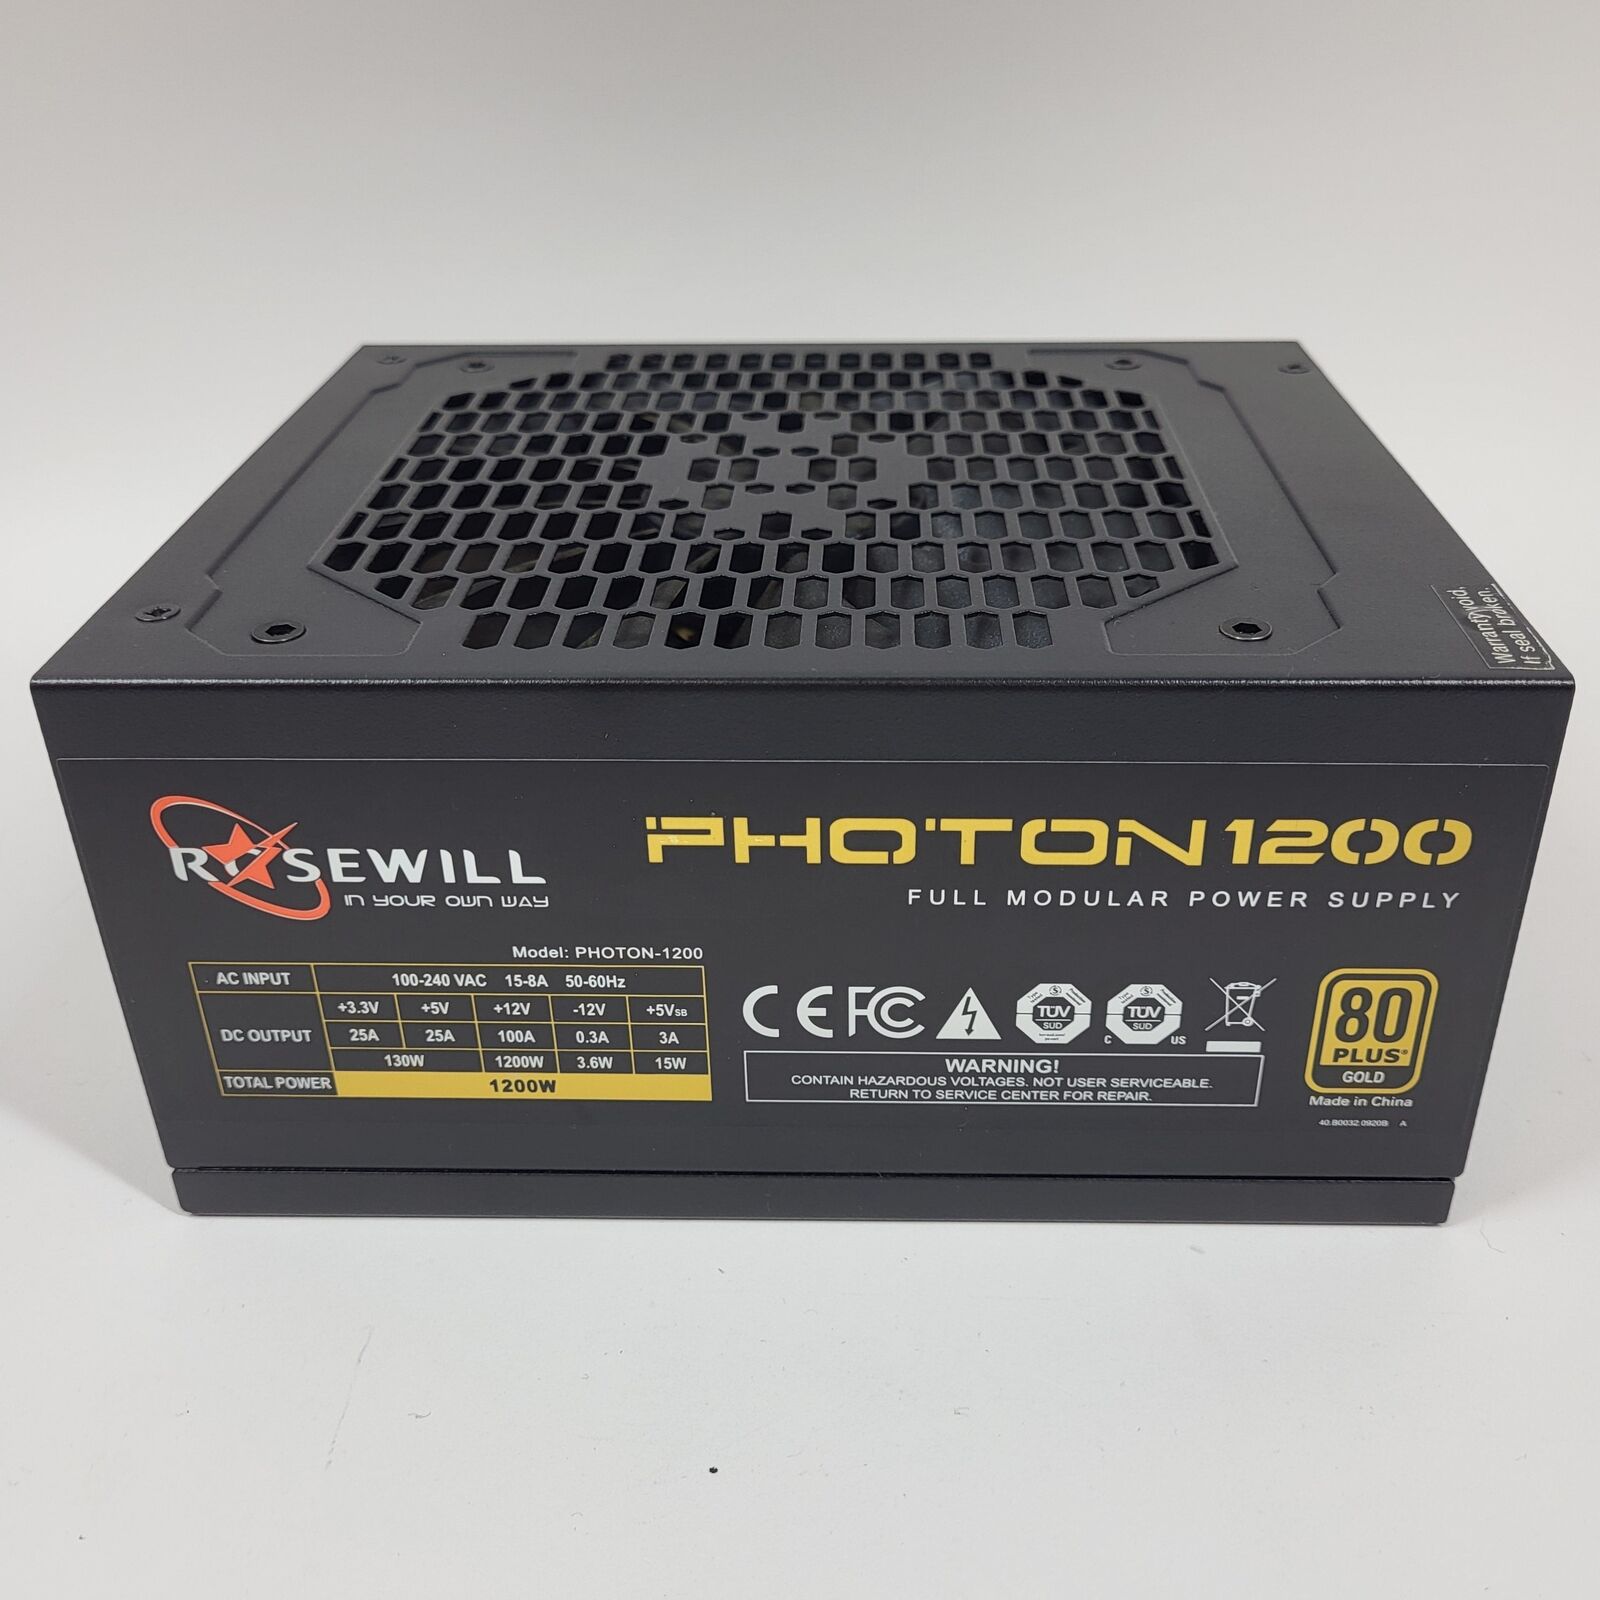 Rosewill Photon 1200 PHOTON-1200 80 Plus Gold 1200W Fully Modular Power Supply